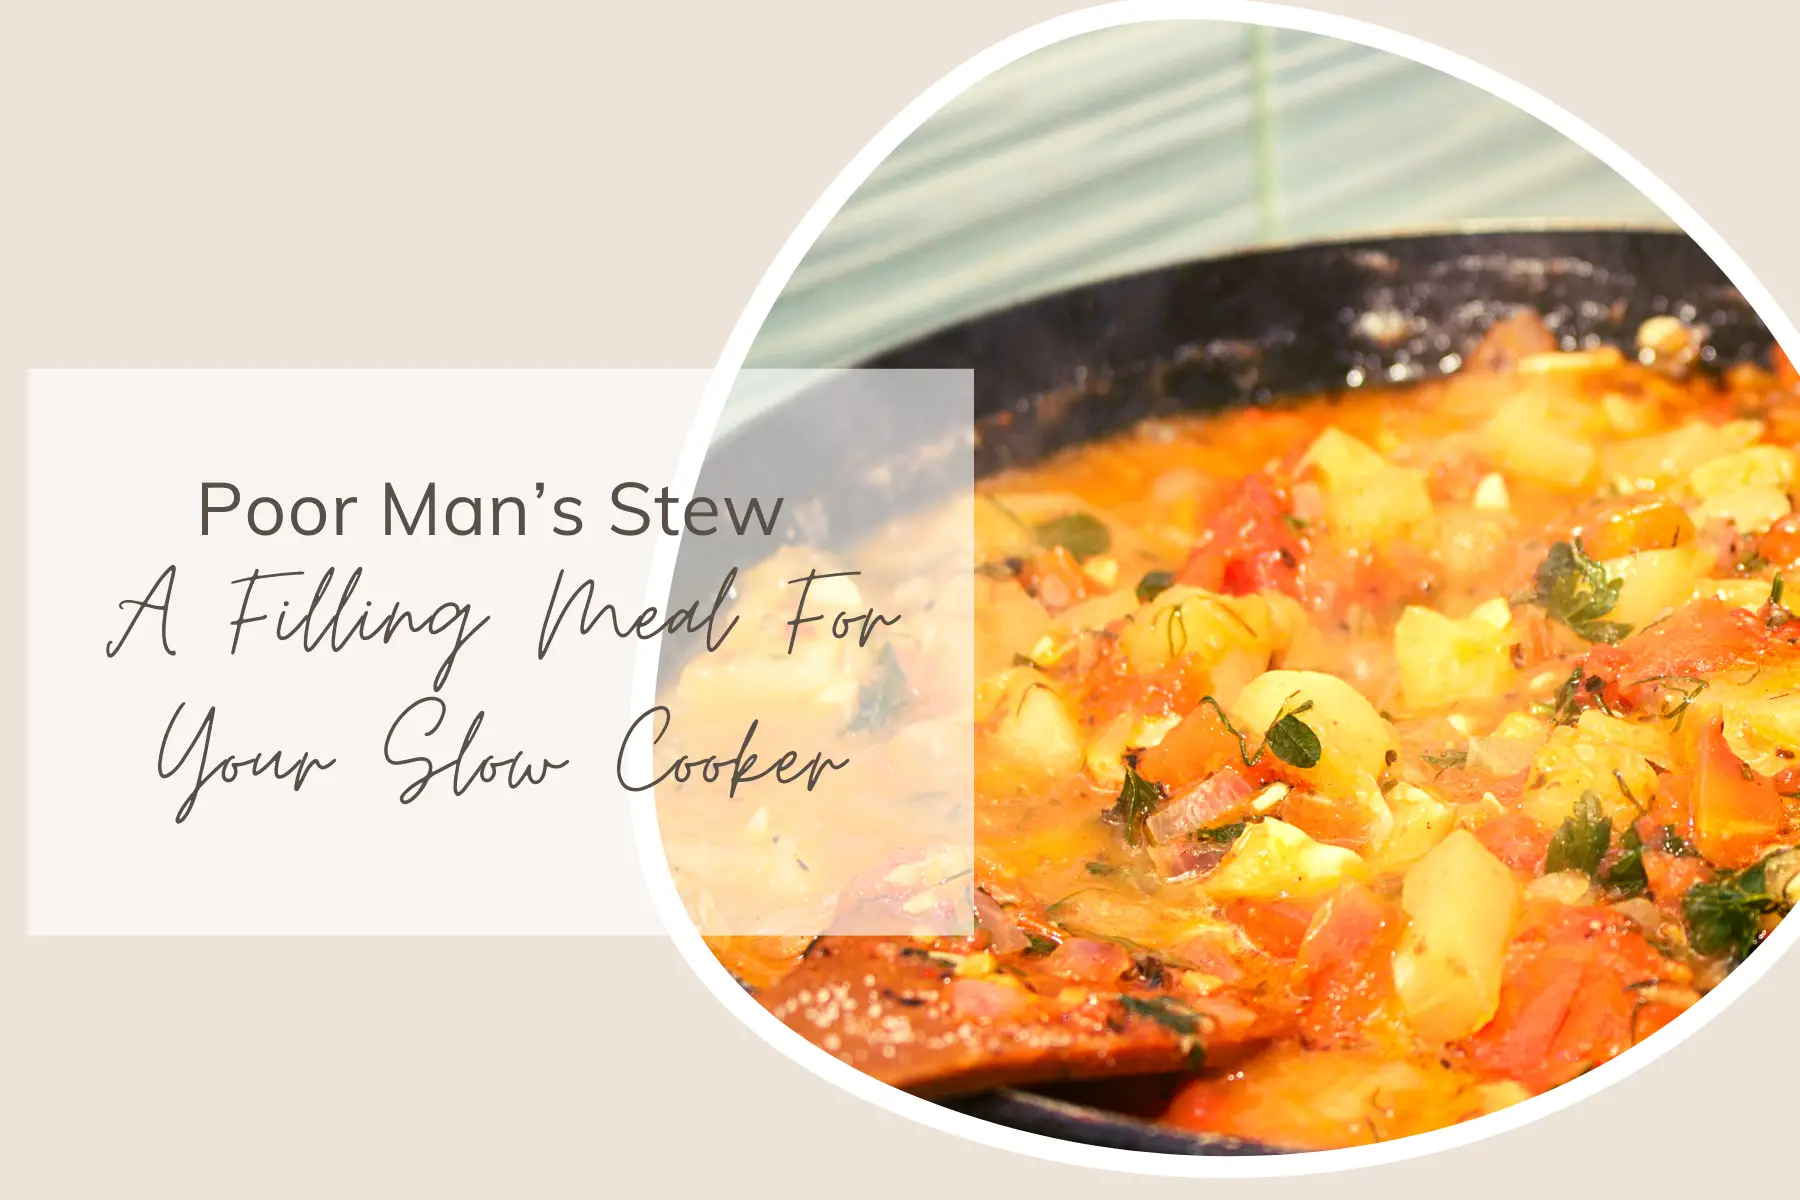 Poor Man’s Stew- A Filling Meal For Your Slow Cooker